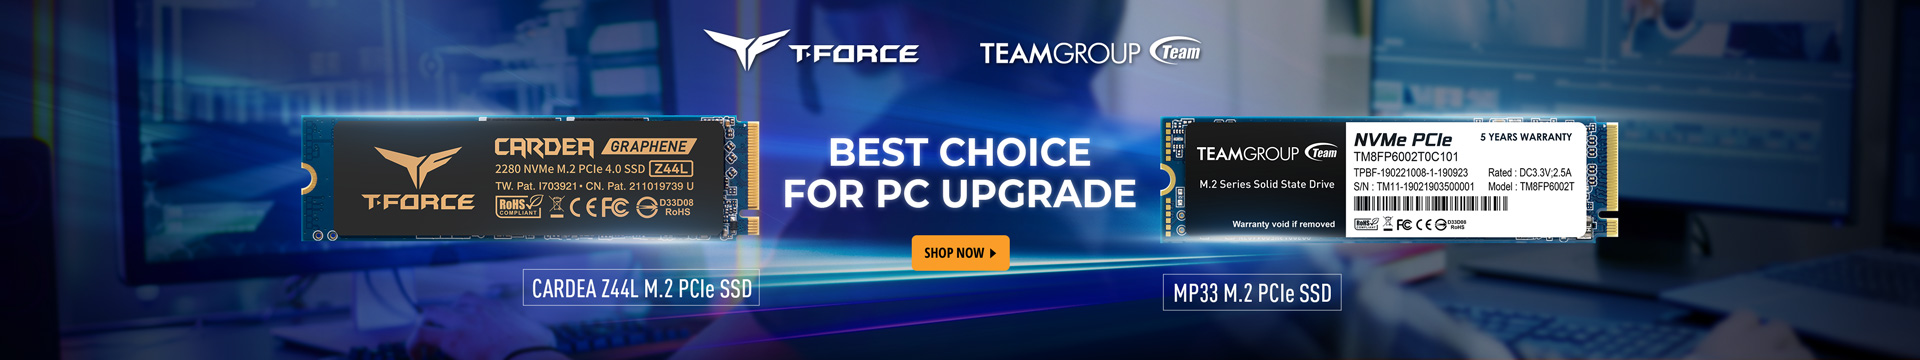 Best choice for PC upgrade